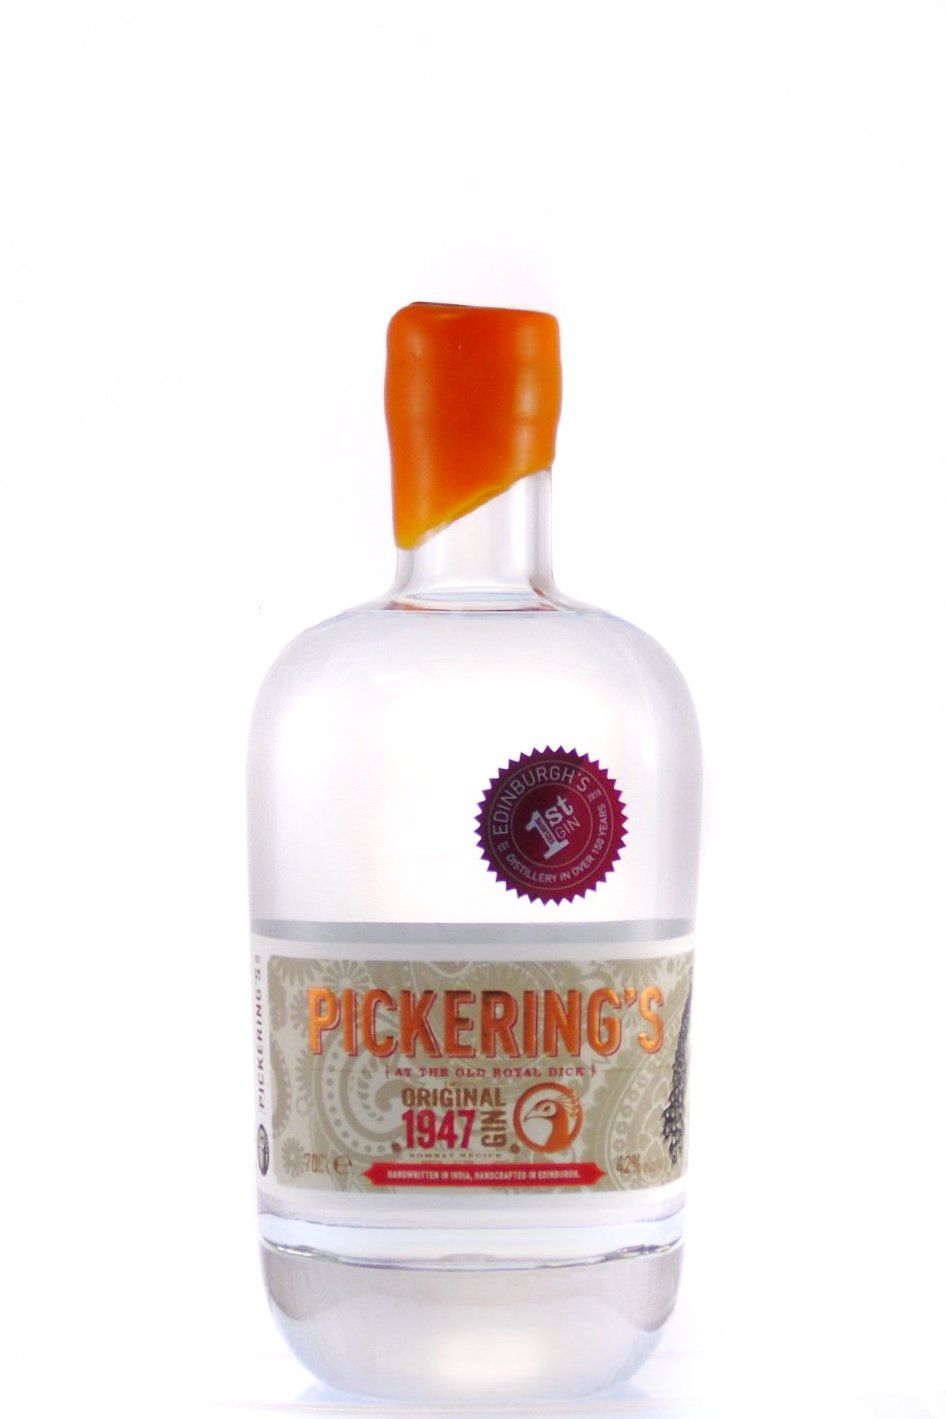 Pickerings 1947 Gin Gins & Gin Liqueurs